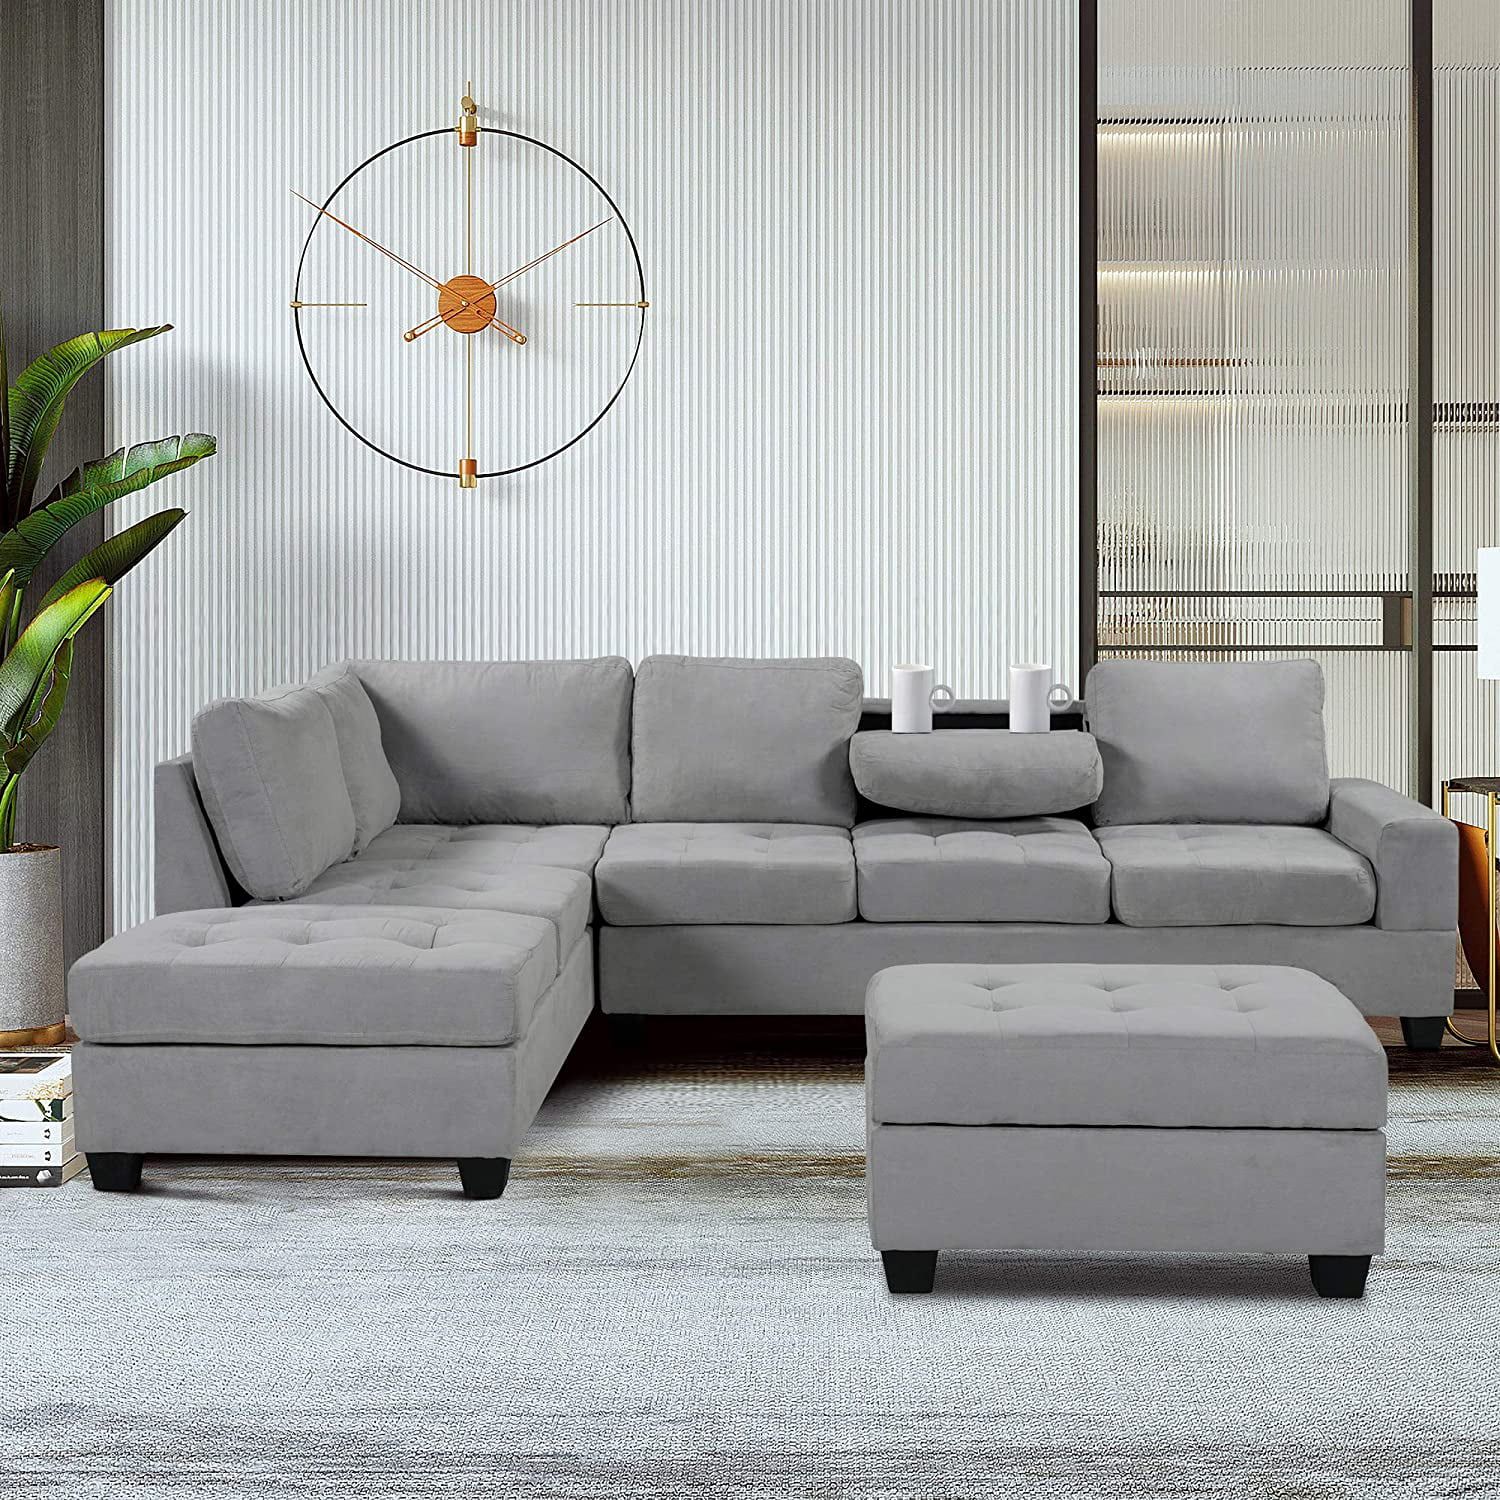 3 Piece Convertible Sectional Sofa L Shaped Couch With Reversible Throughout Sofas With Ottomans (Gallery 16 of 20)